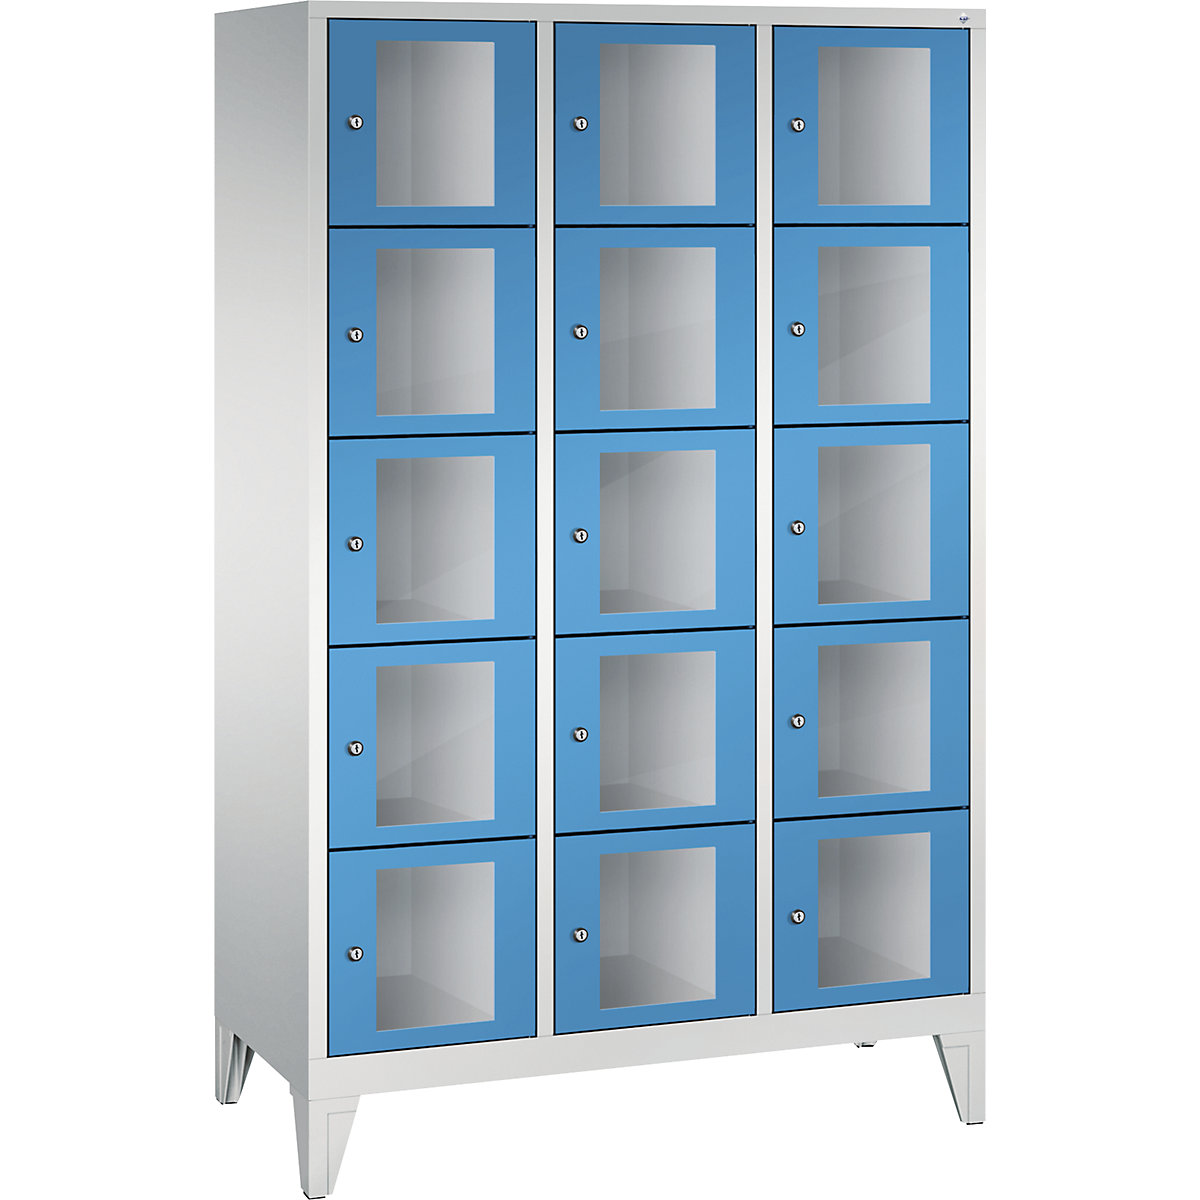 C+P – CLASSIC locker unit, compartment height 295 mm, with feet, 15 compartments, width 1200 mm, light blue door